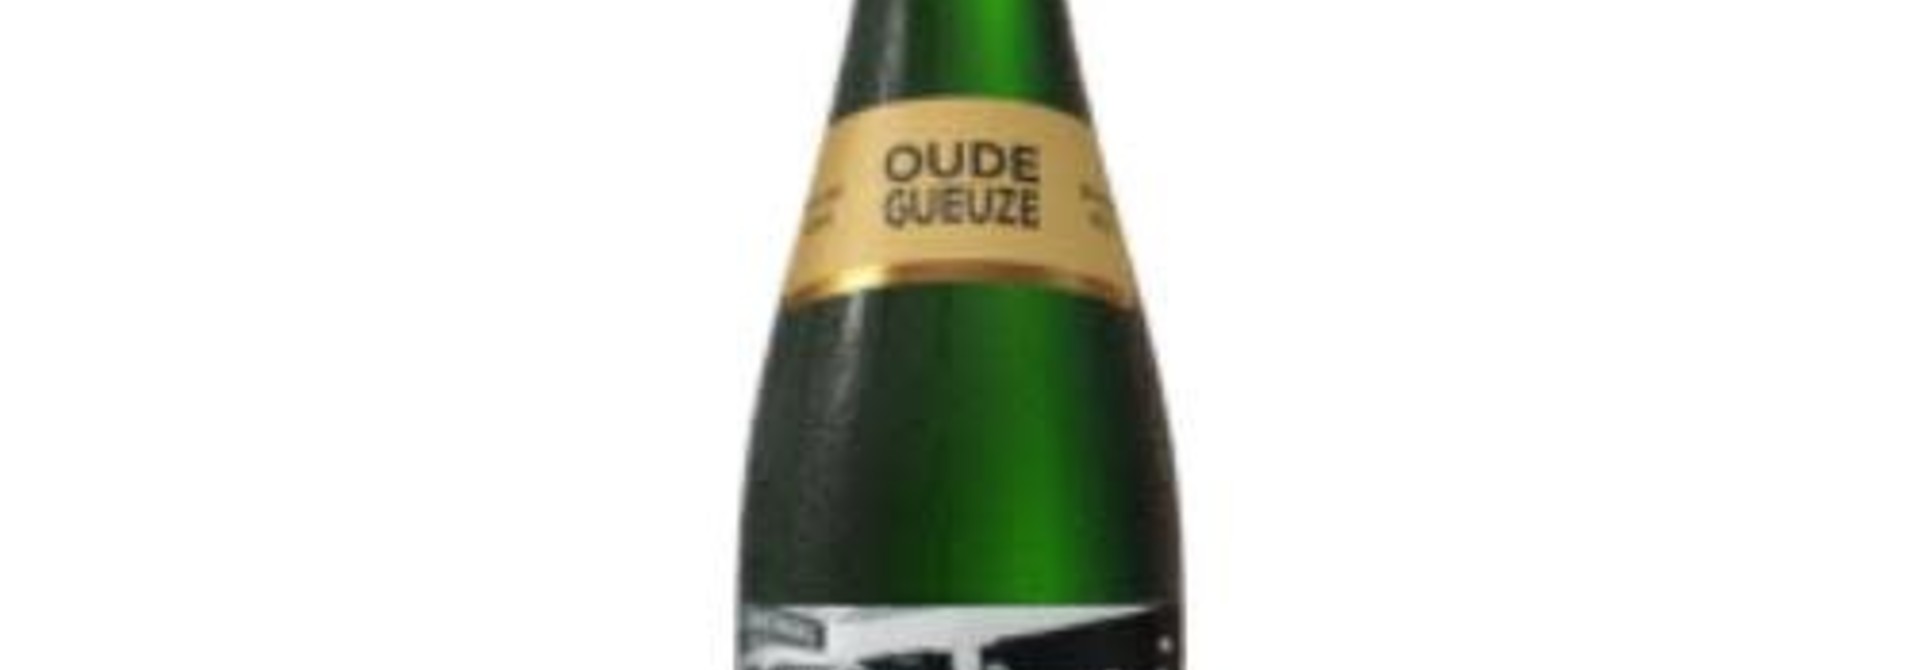 TIMMERMANS - OUDE GUEUZE 37.5CL